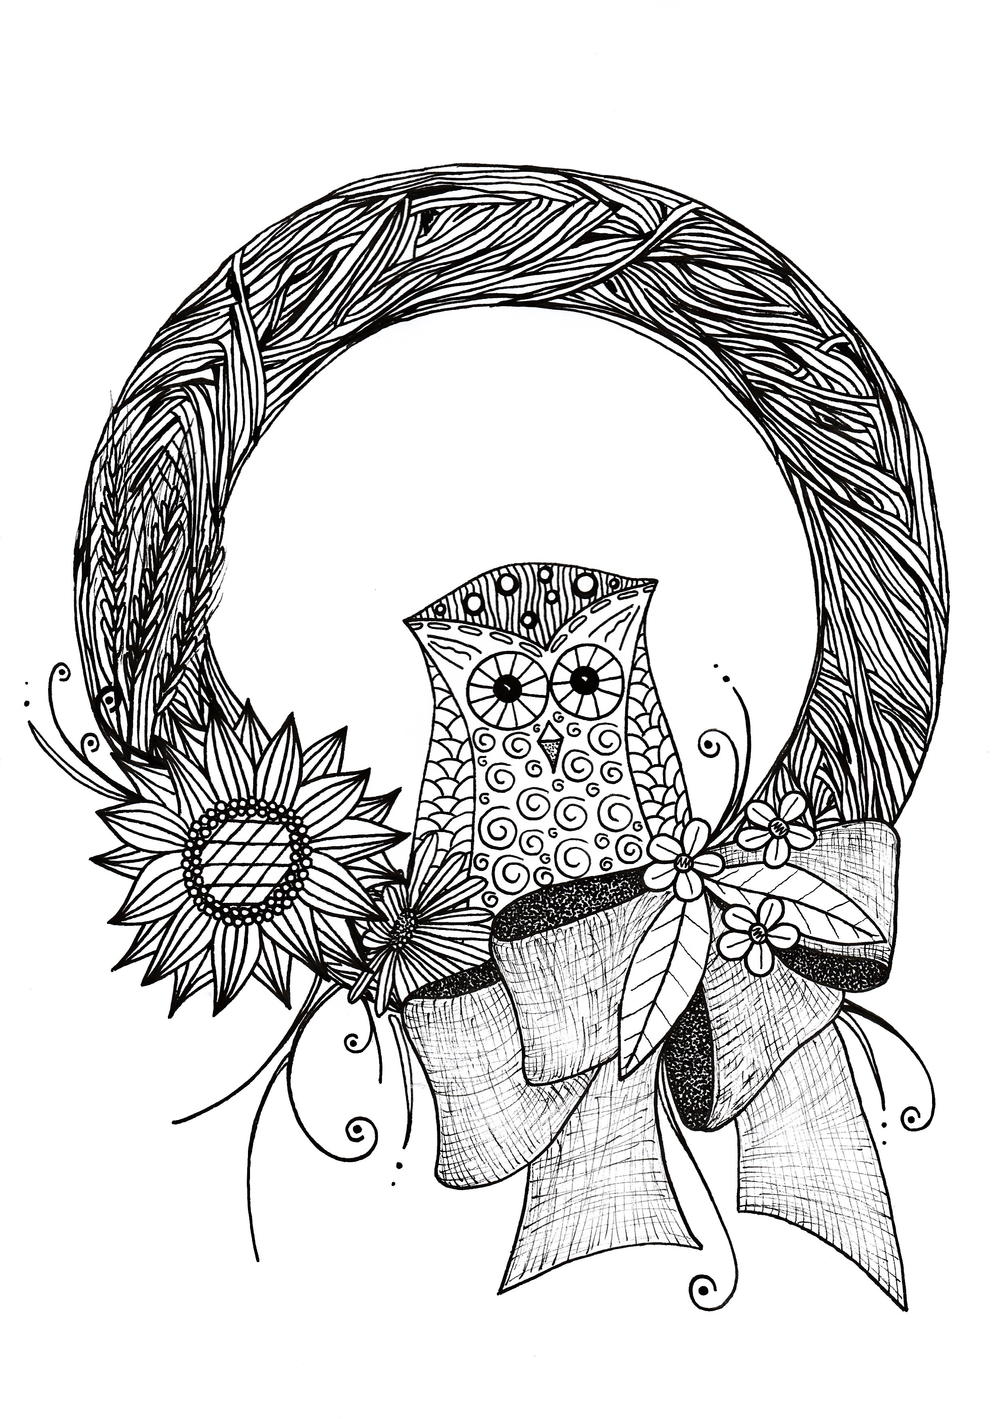 Intricate Fall Wreath Adult Coloring Page | FaveCrafts.com